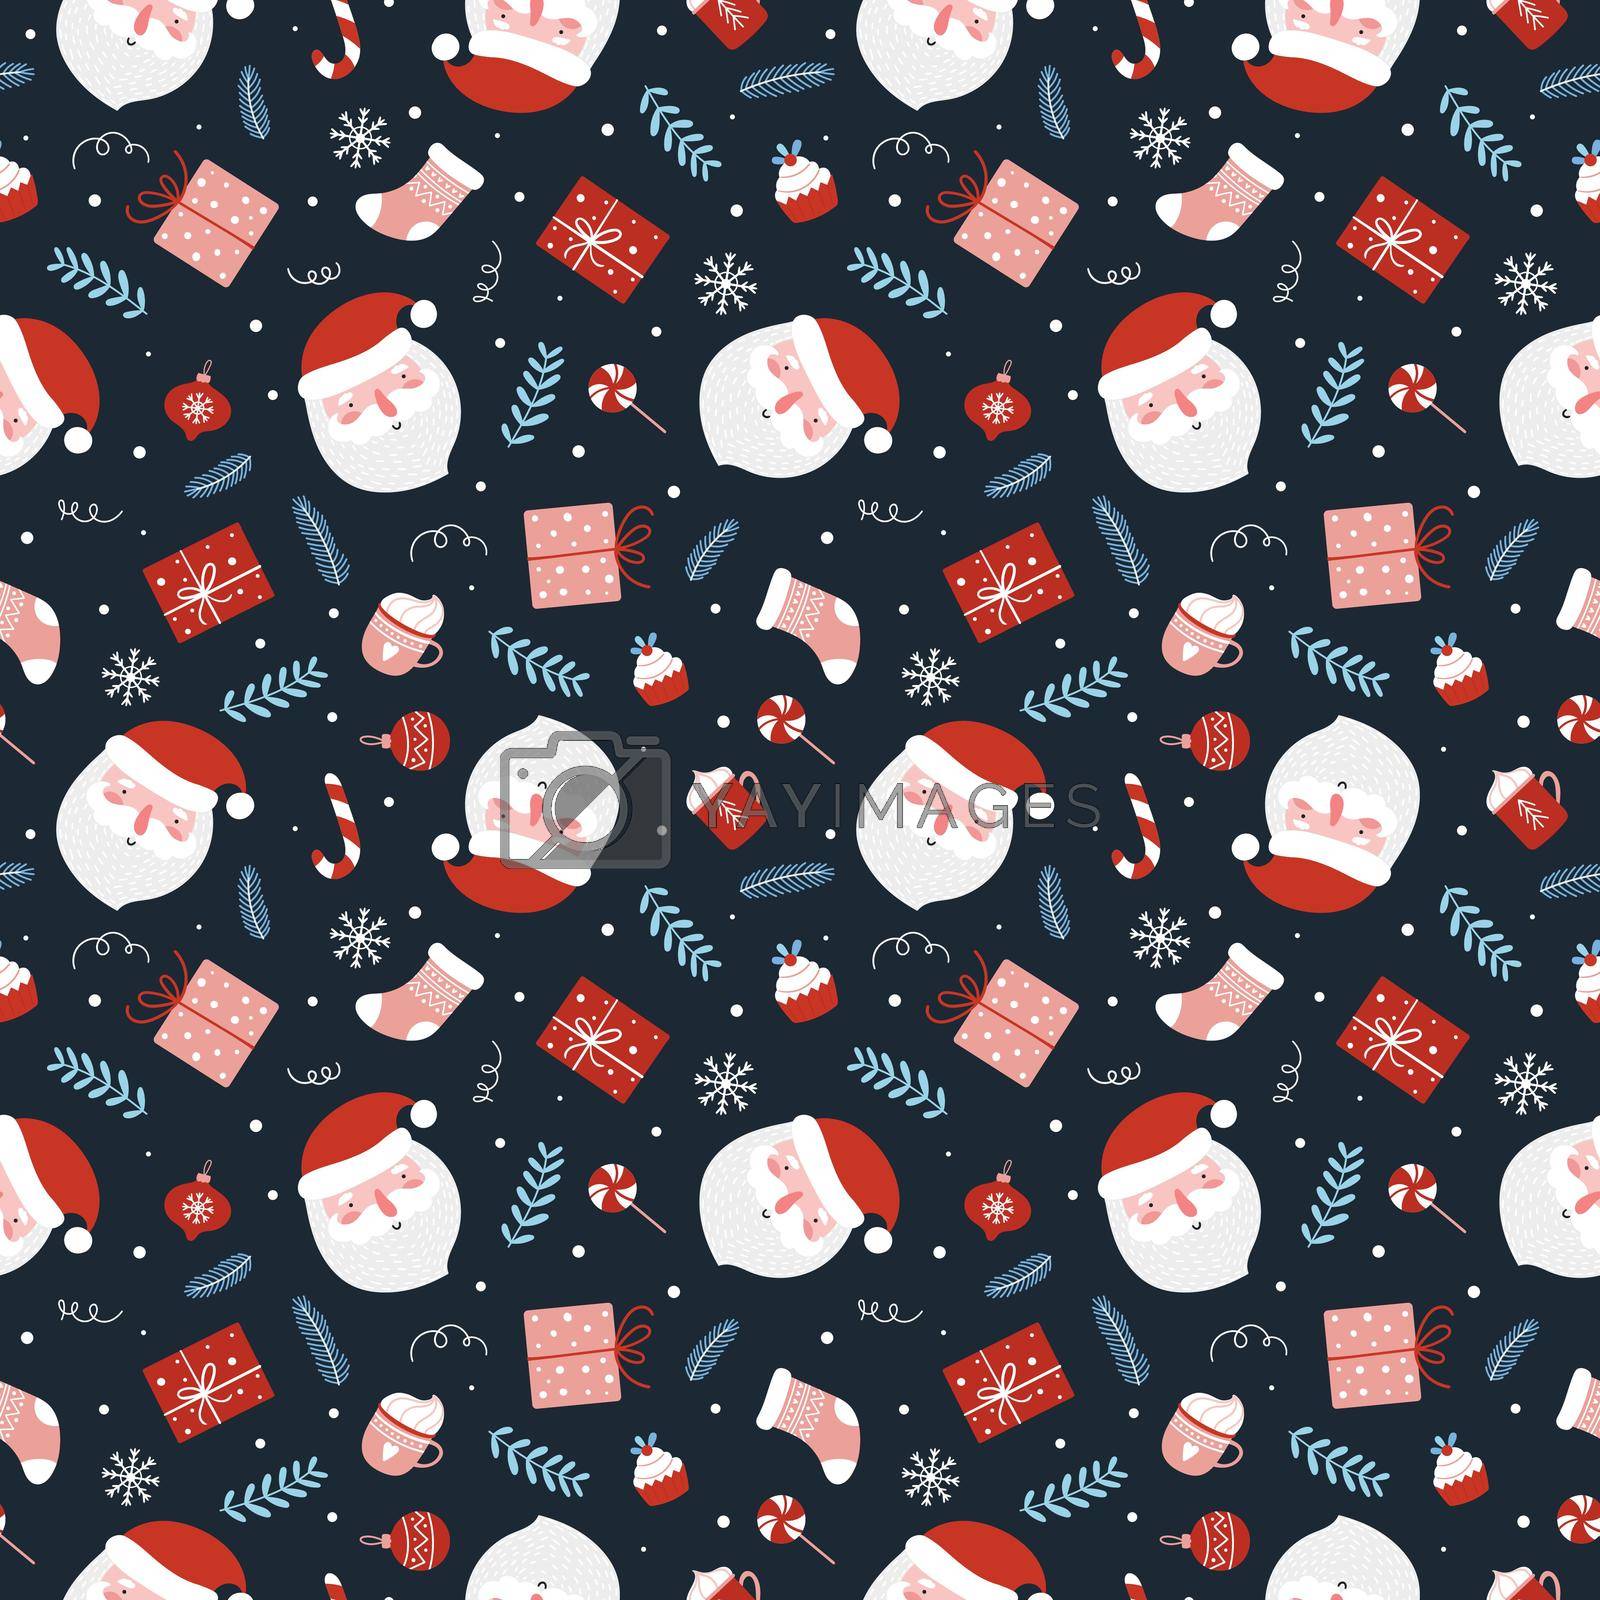 Royalty free image of Christmas seamless pattern with funny santa gifts, balls, candy cane, Christmas sock and branches. by Lena_Khmelniuk